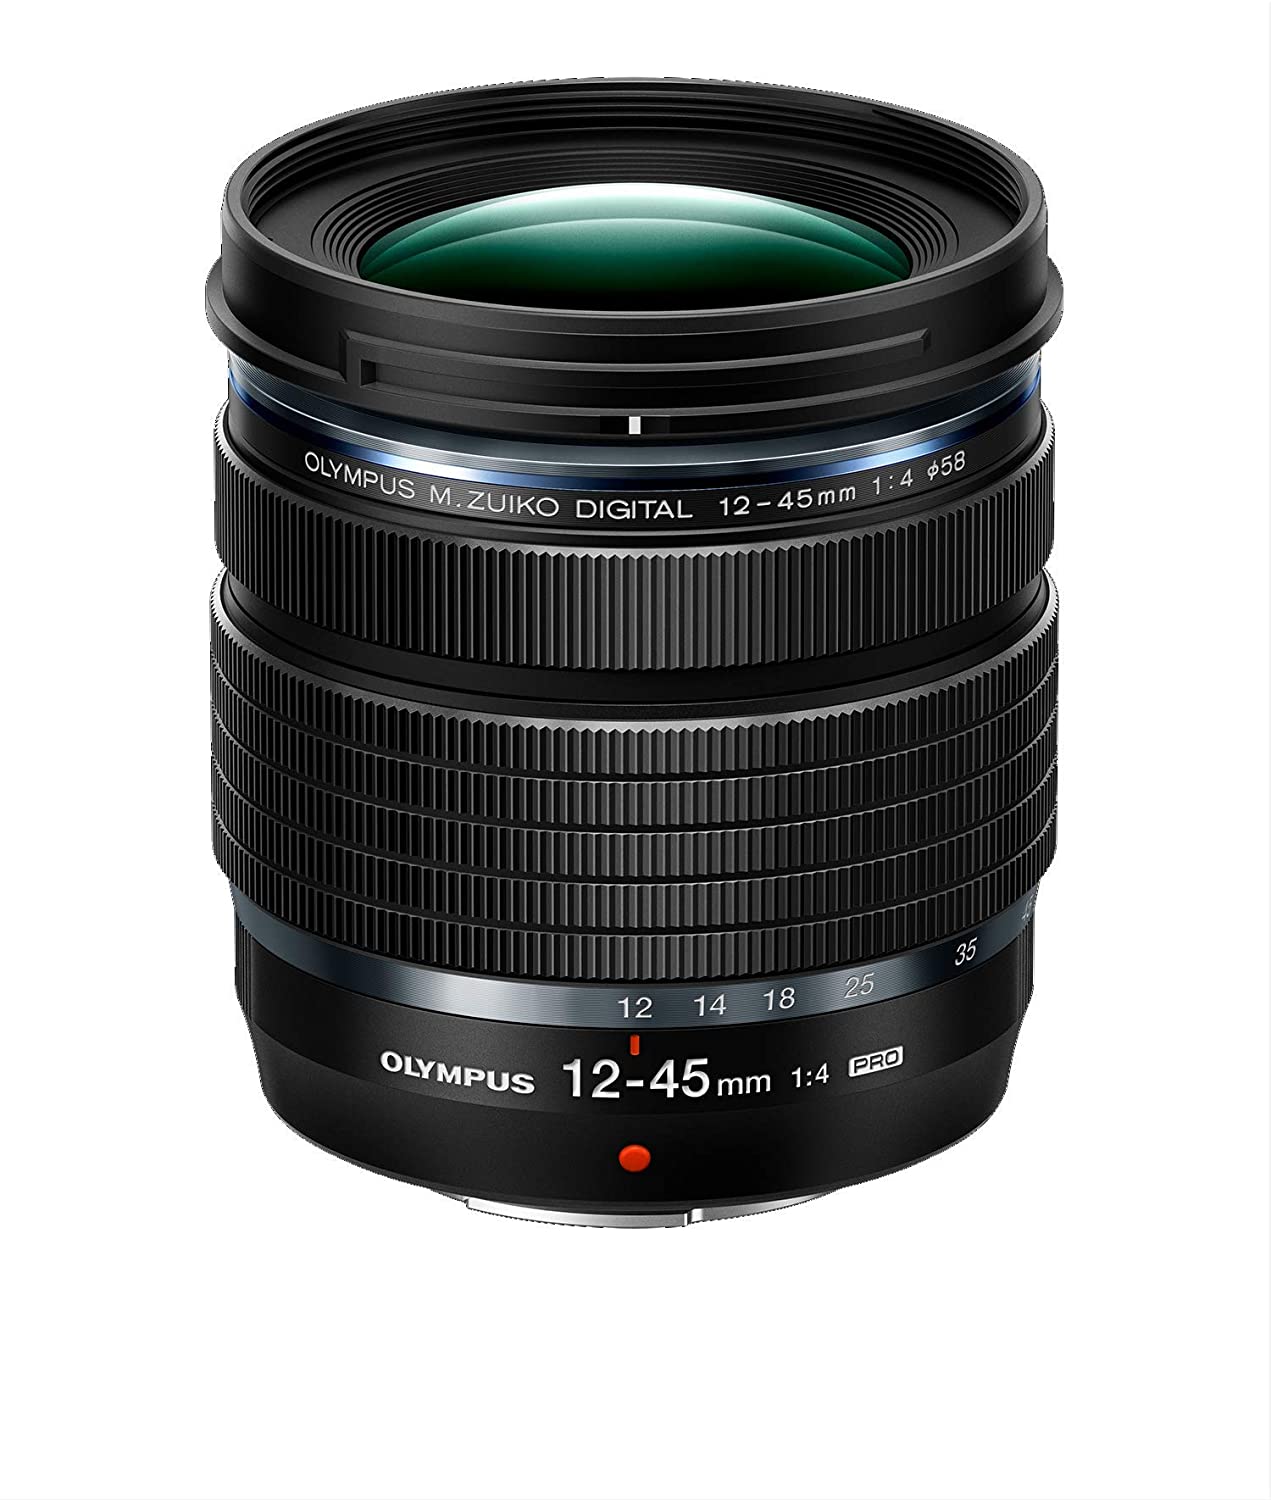 PHOTOGRAPHIC CENTRAL: Olympus M.Zuiko 12-45mm f/4 PRO Review